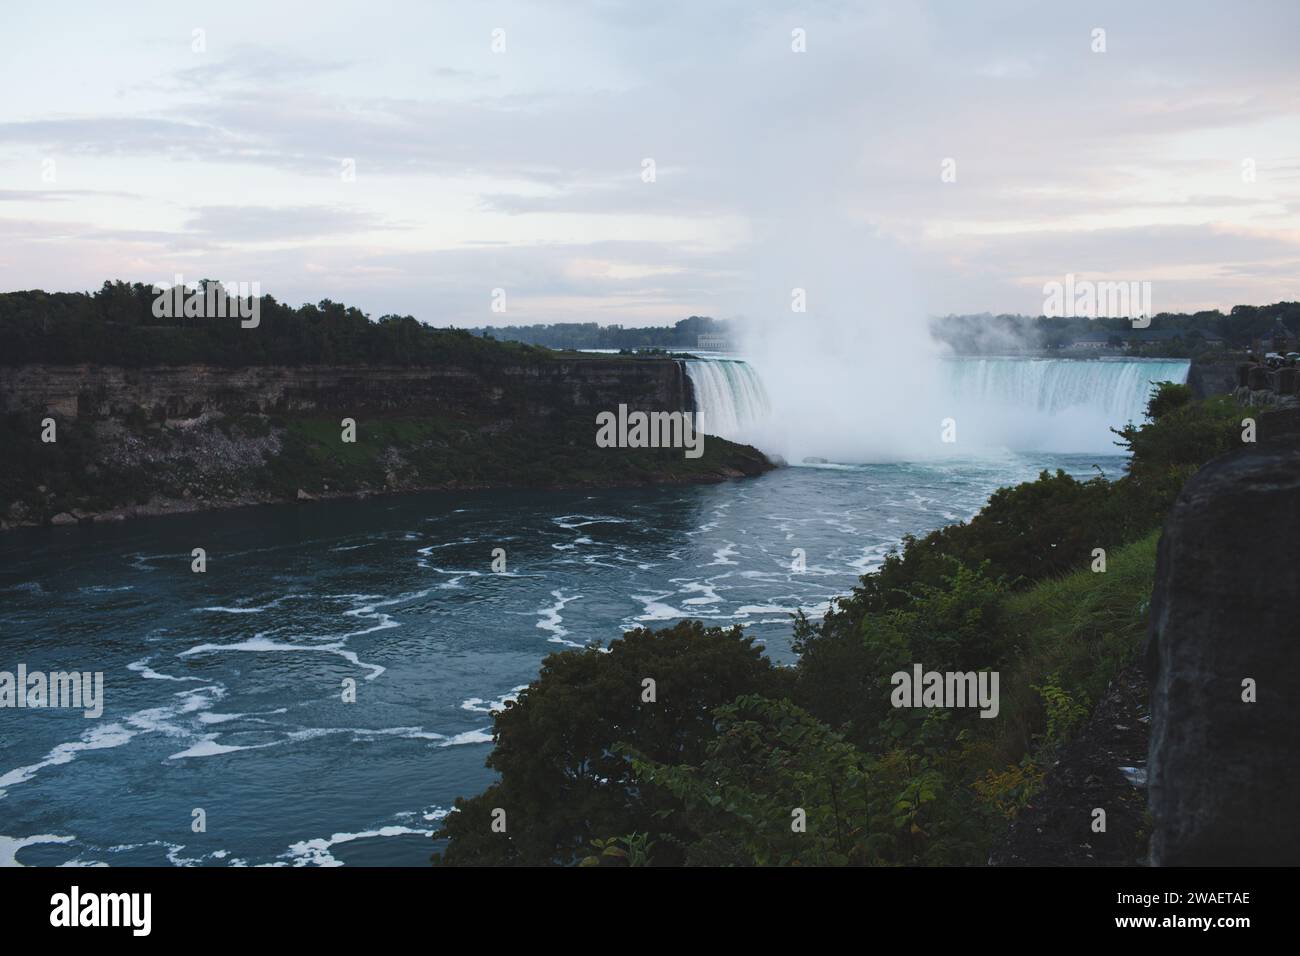 A scenic view of Niagara Falls in Ontario, Canada, with cascading waters framed by green vegetation Stock Photo